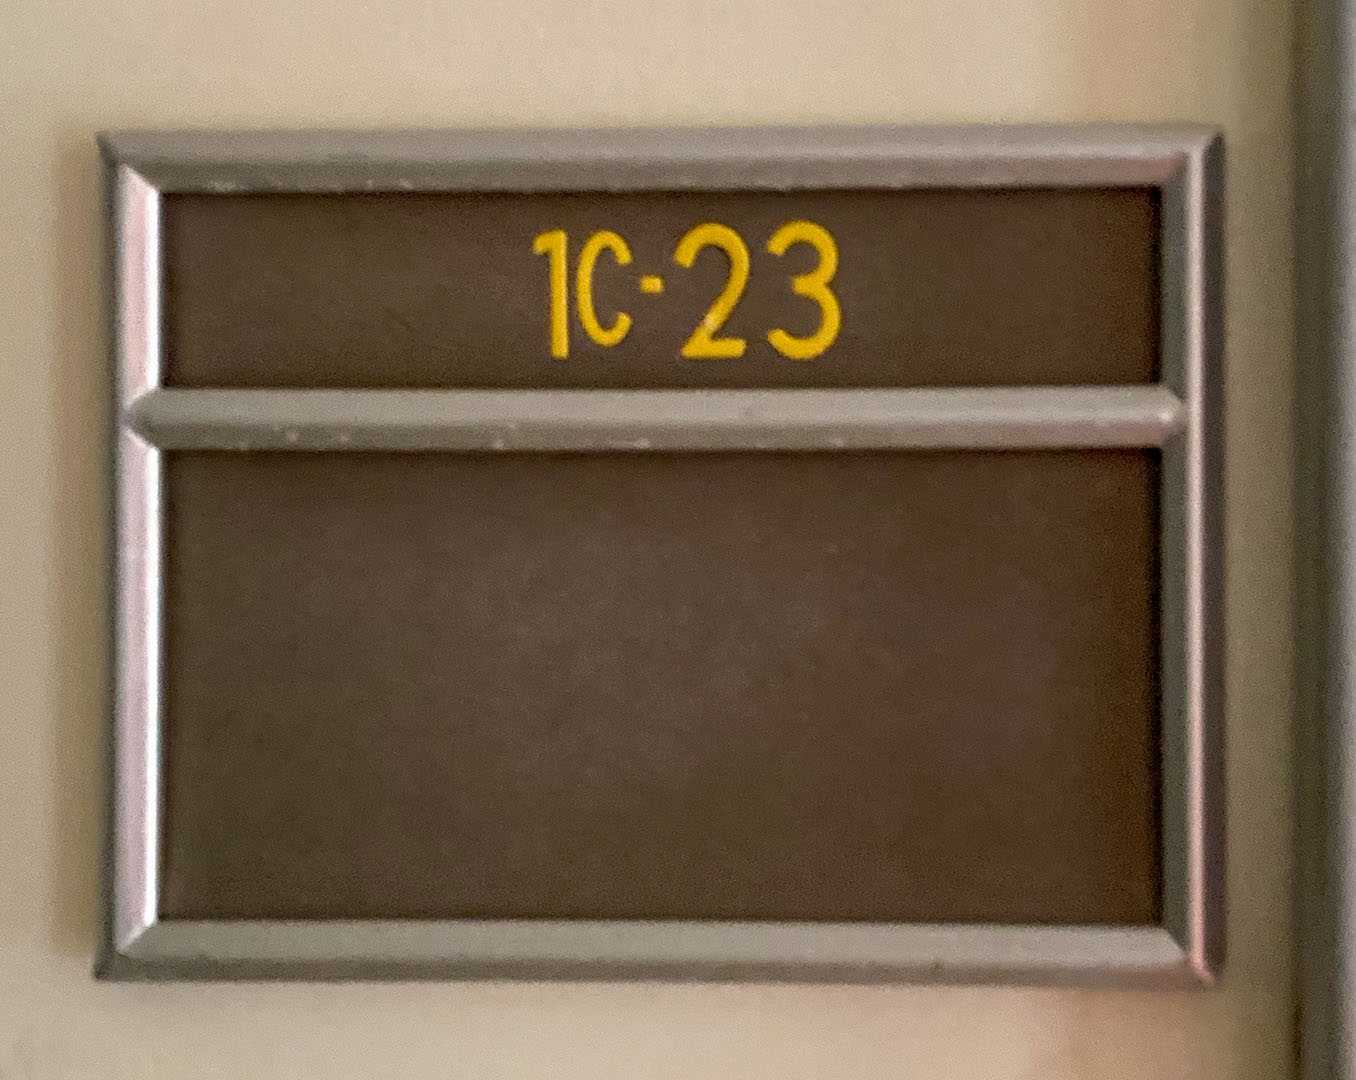 A yellow and brown sign with room number 1C23 on it, in an aluminum rectangular holder